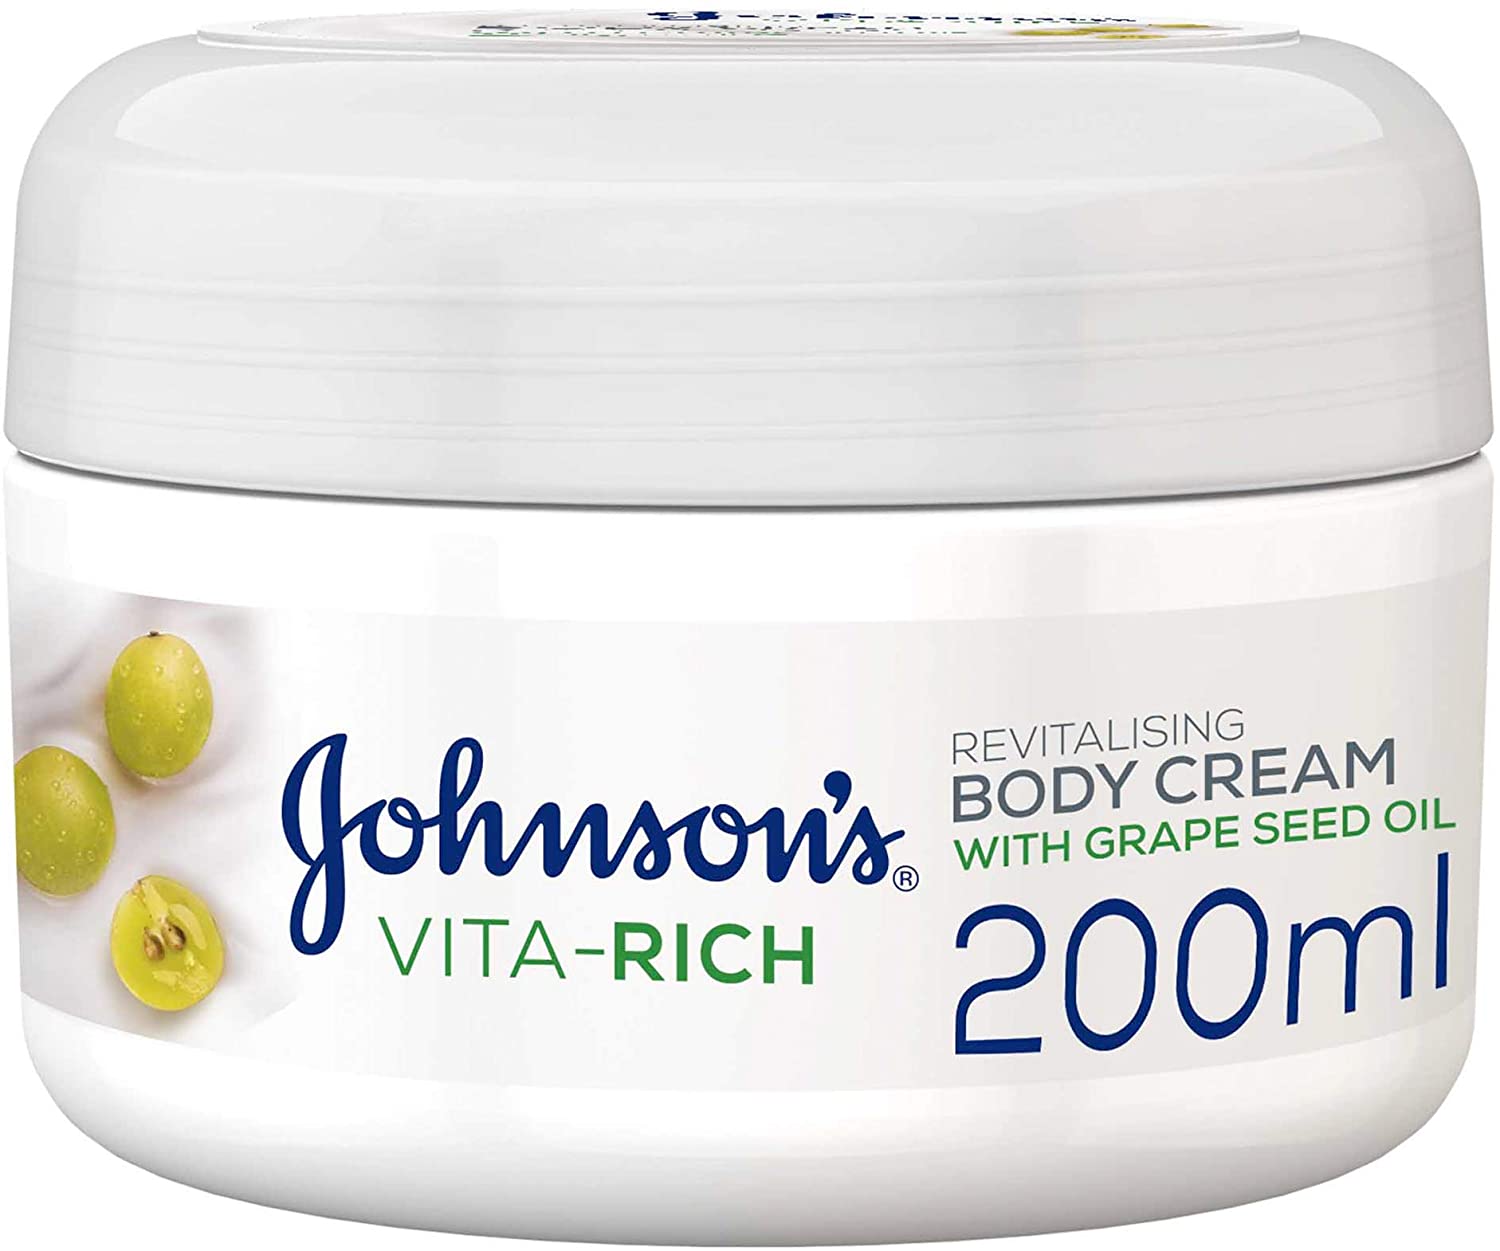 JOHNSON'S® Vita-Rich Soothing Body Cream with Rose Water